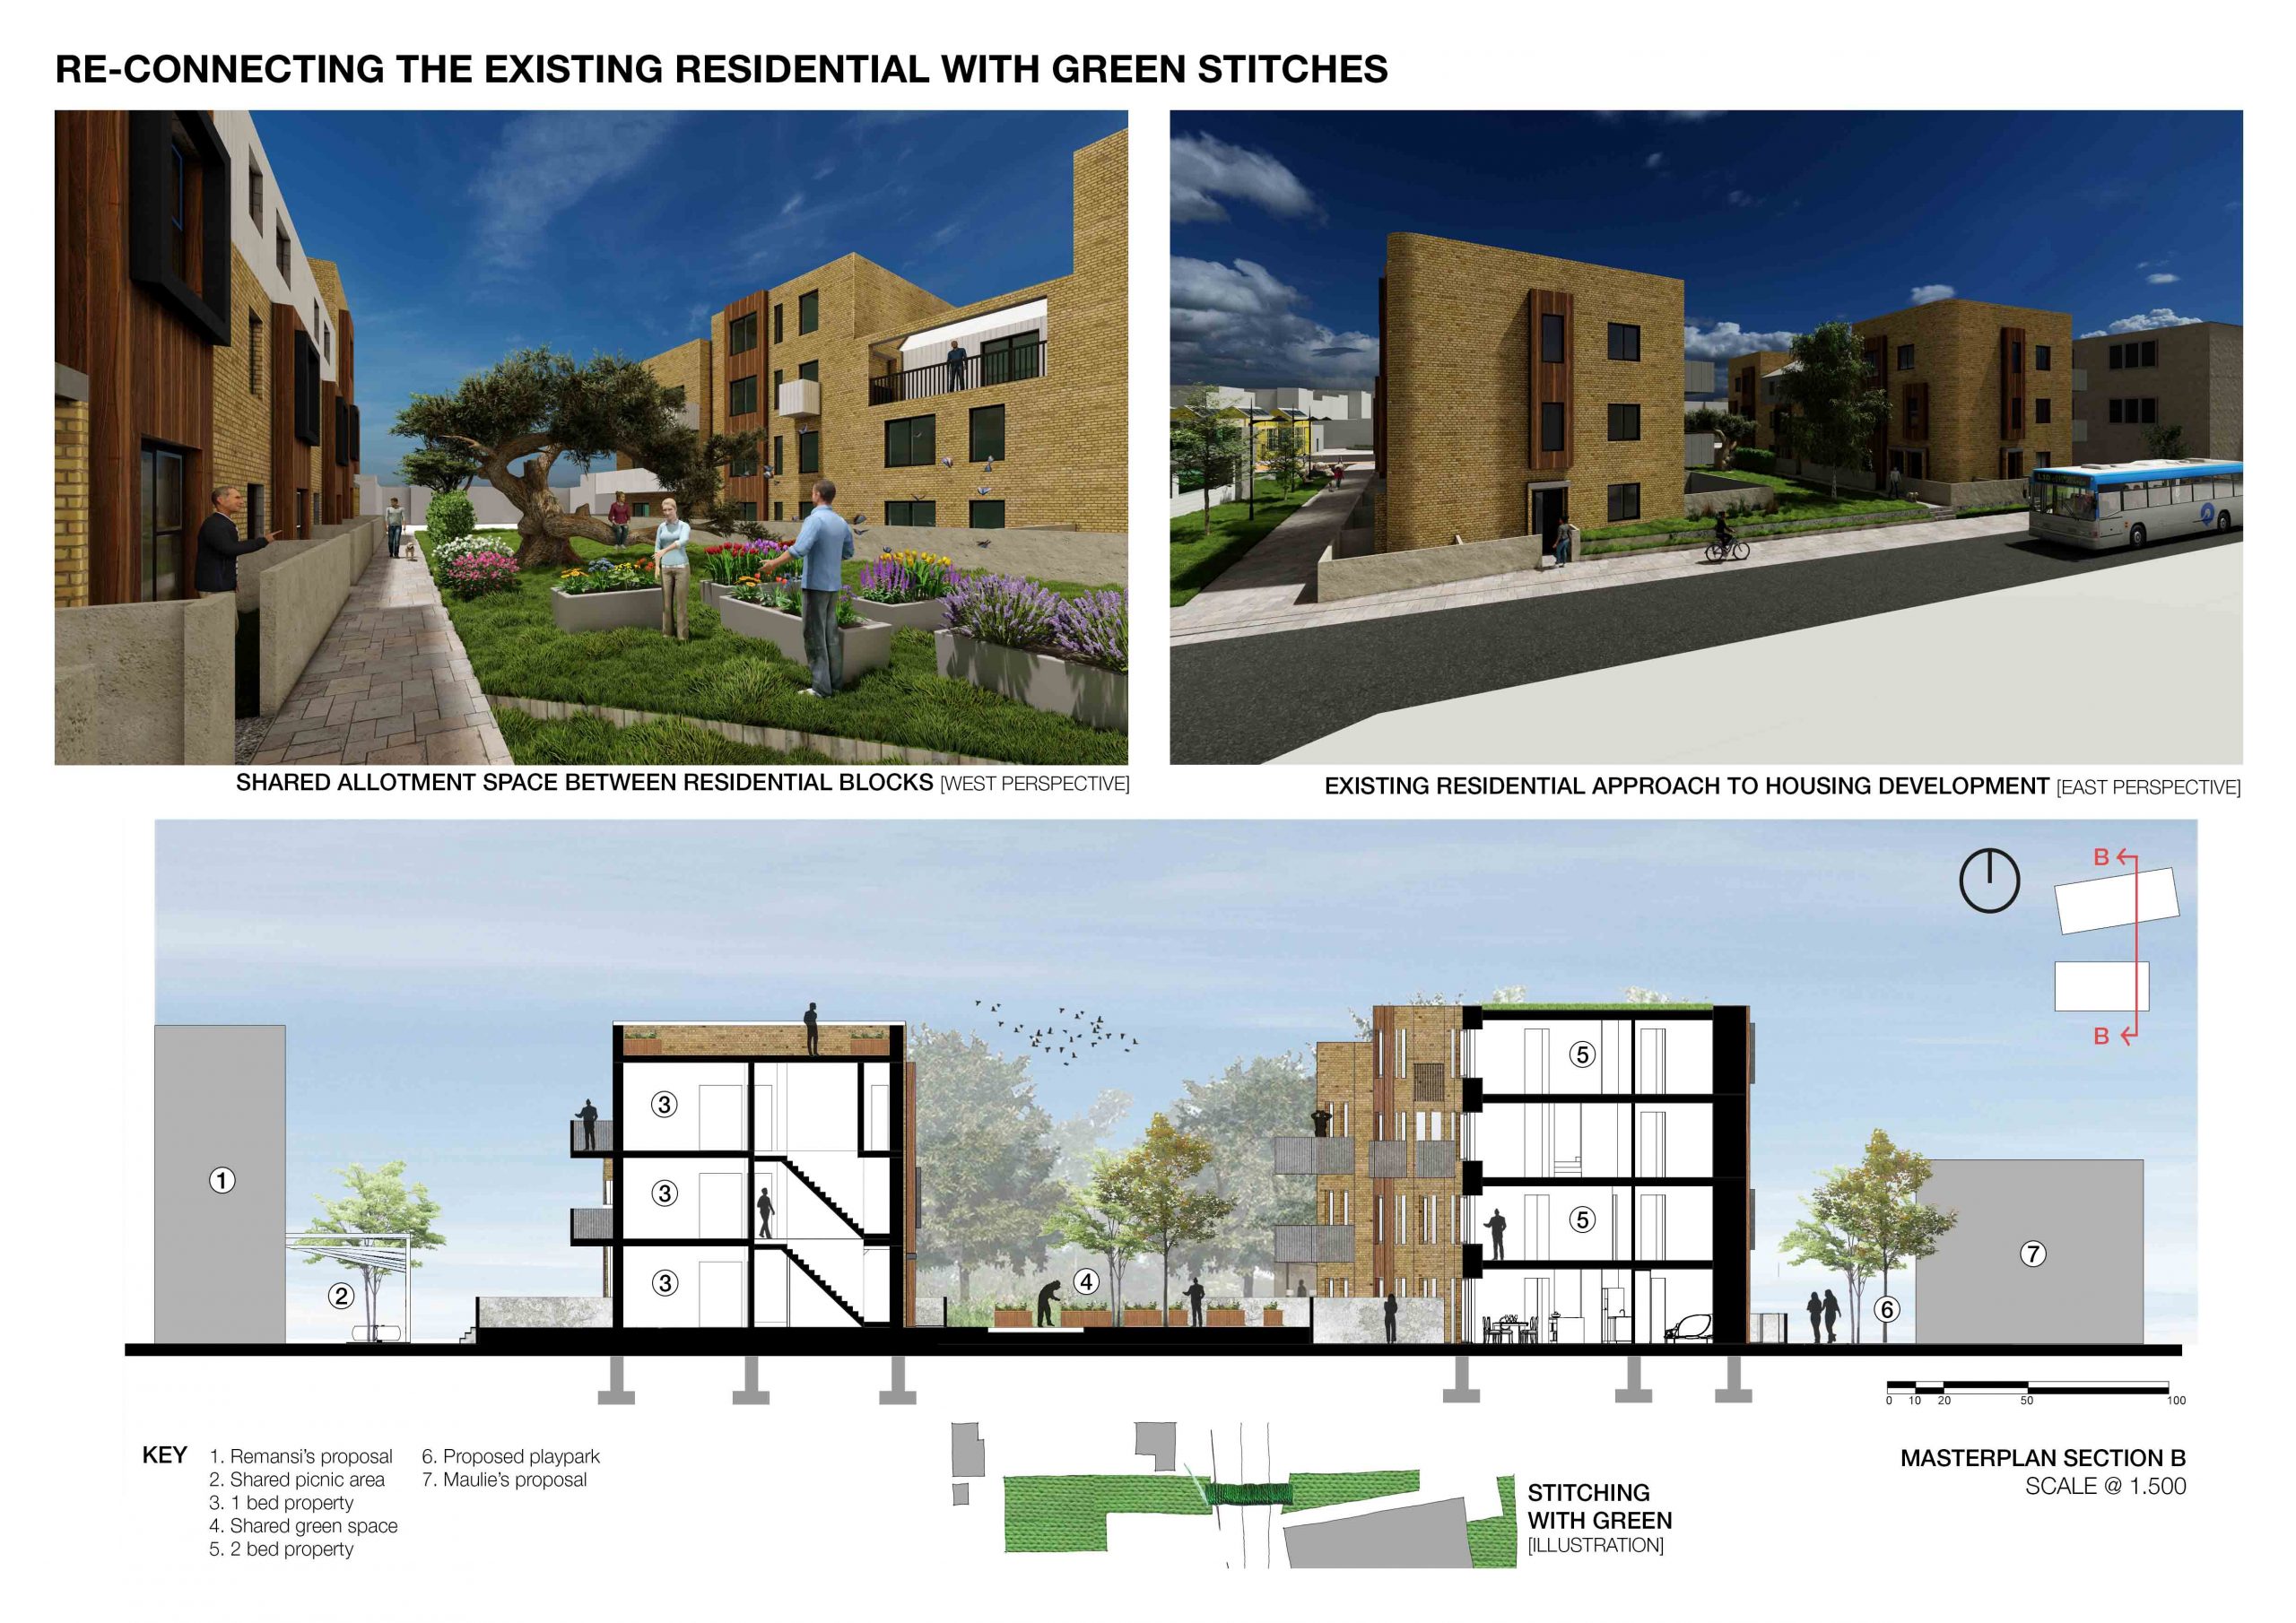 'Room to Grow'- Re-connecting the Existing Residential through Green Stitches